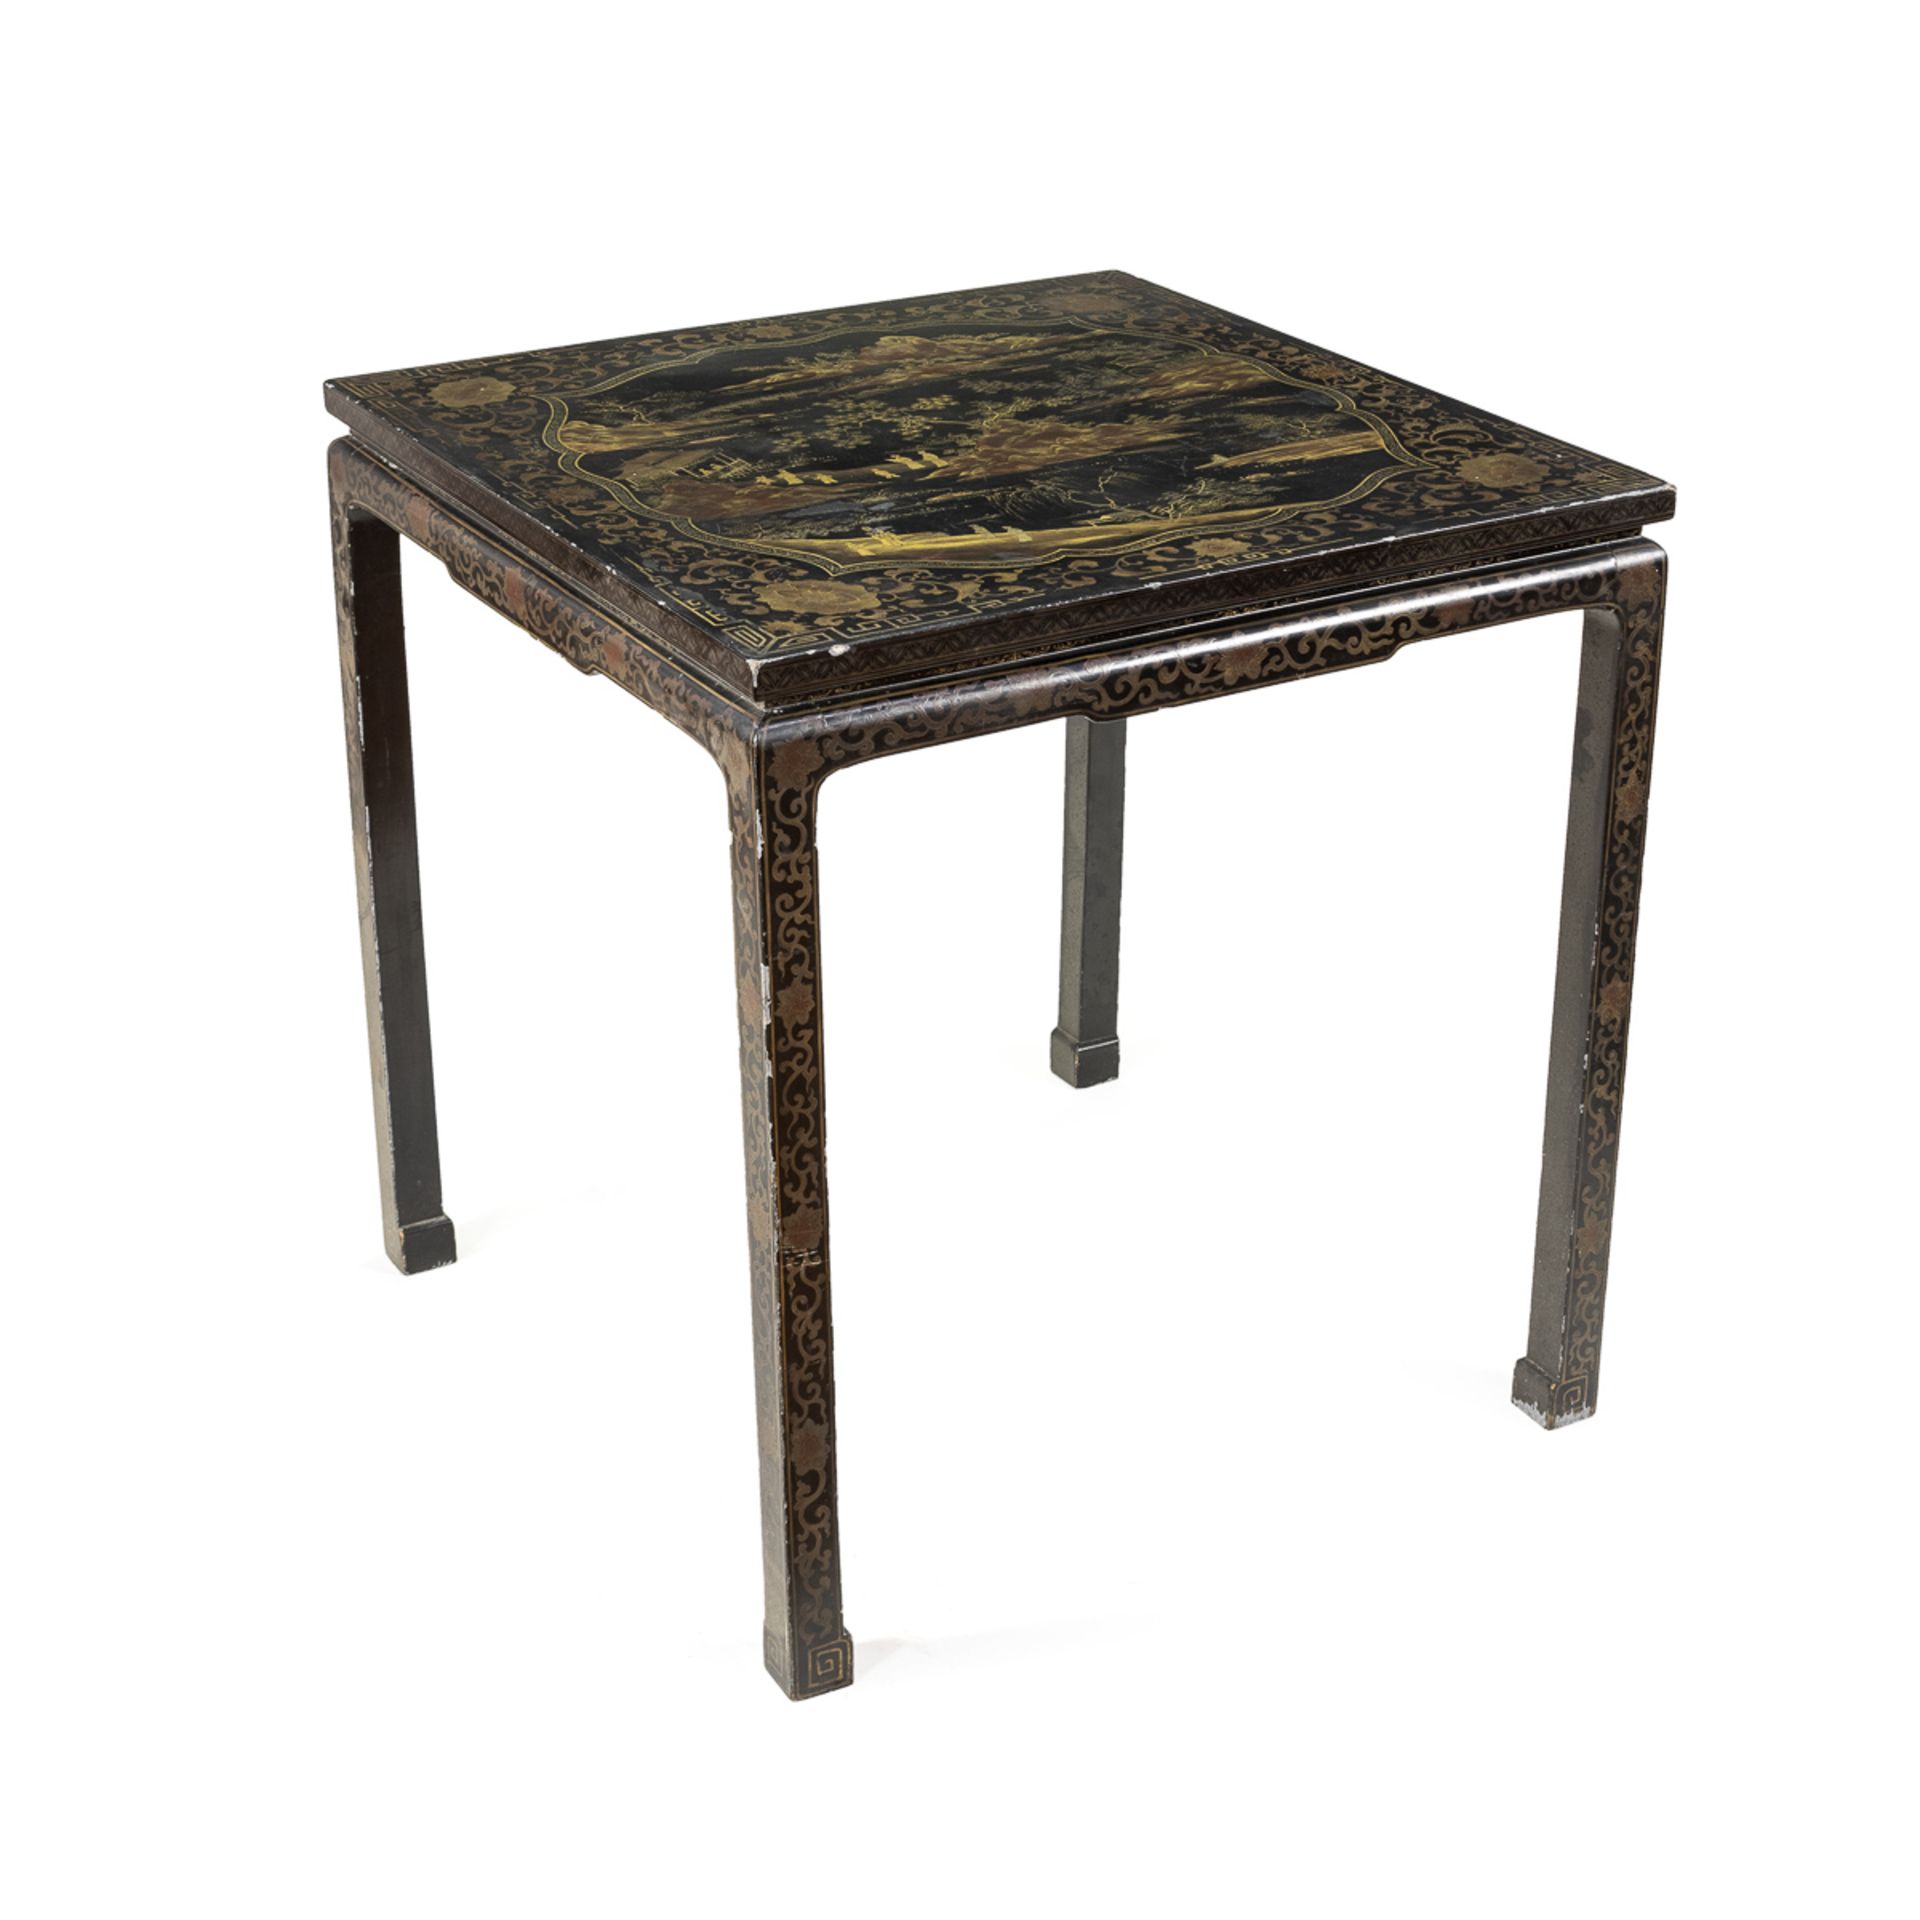 Square lacquered wood coffee table